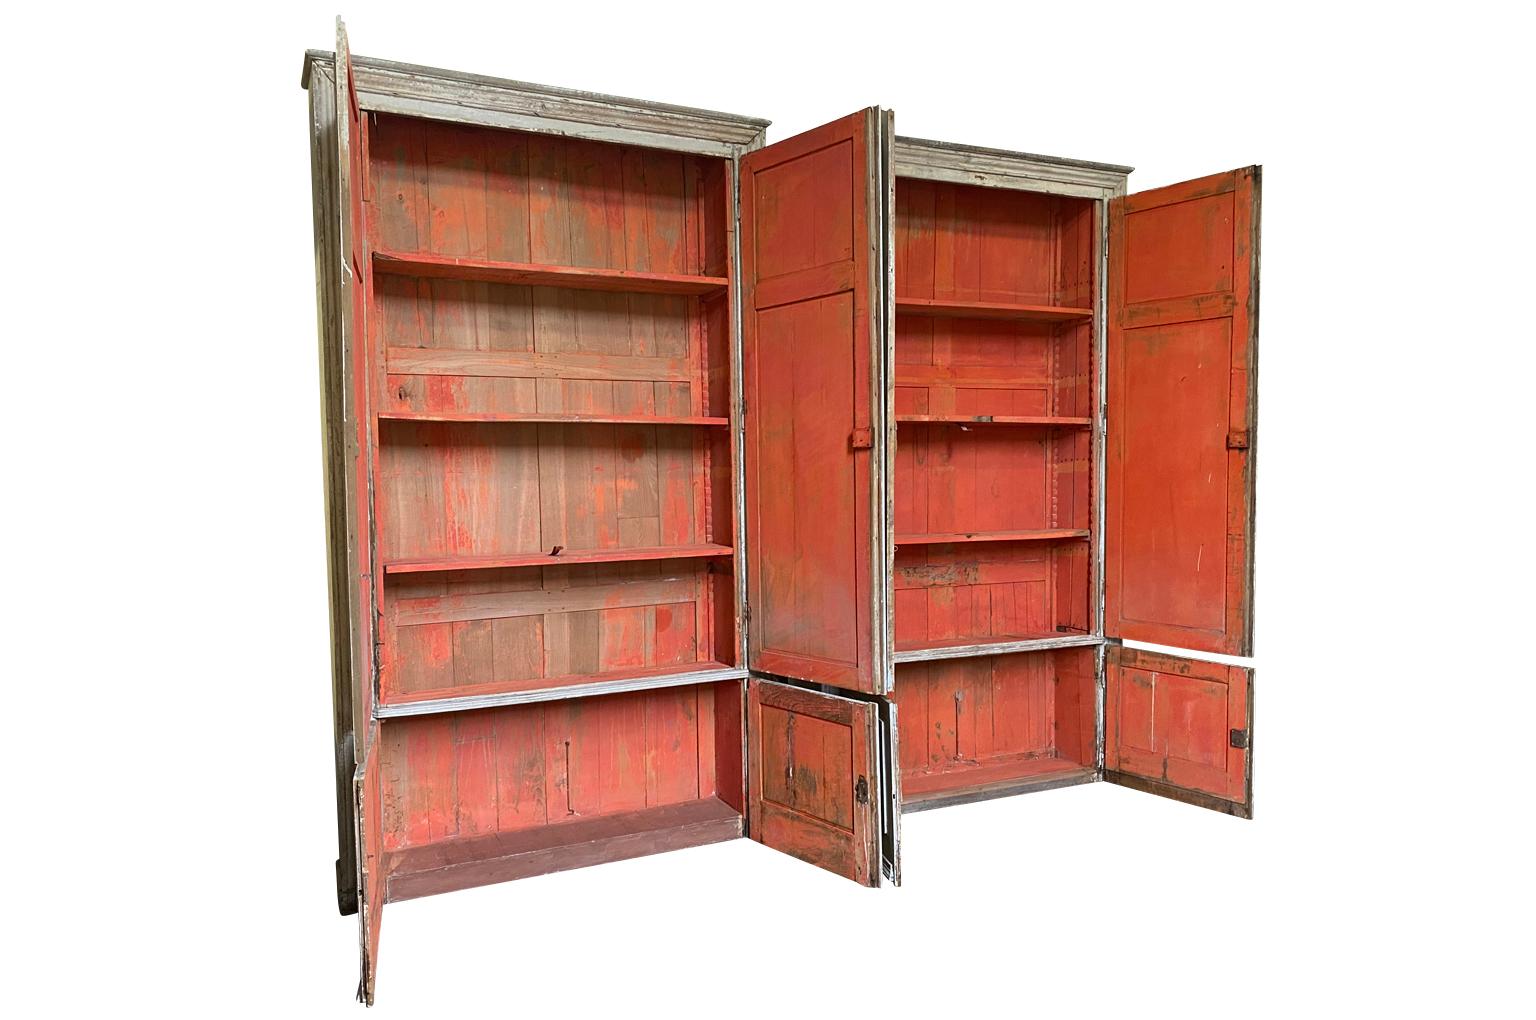 A wonderful pair of 18th century armoires from the South of France. Beautifully constructed from painted wood - each with 4 doors and a stunning orange interior. Great narrow depth. Excellent storage pieces for any living or bedroom area. One